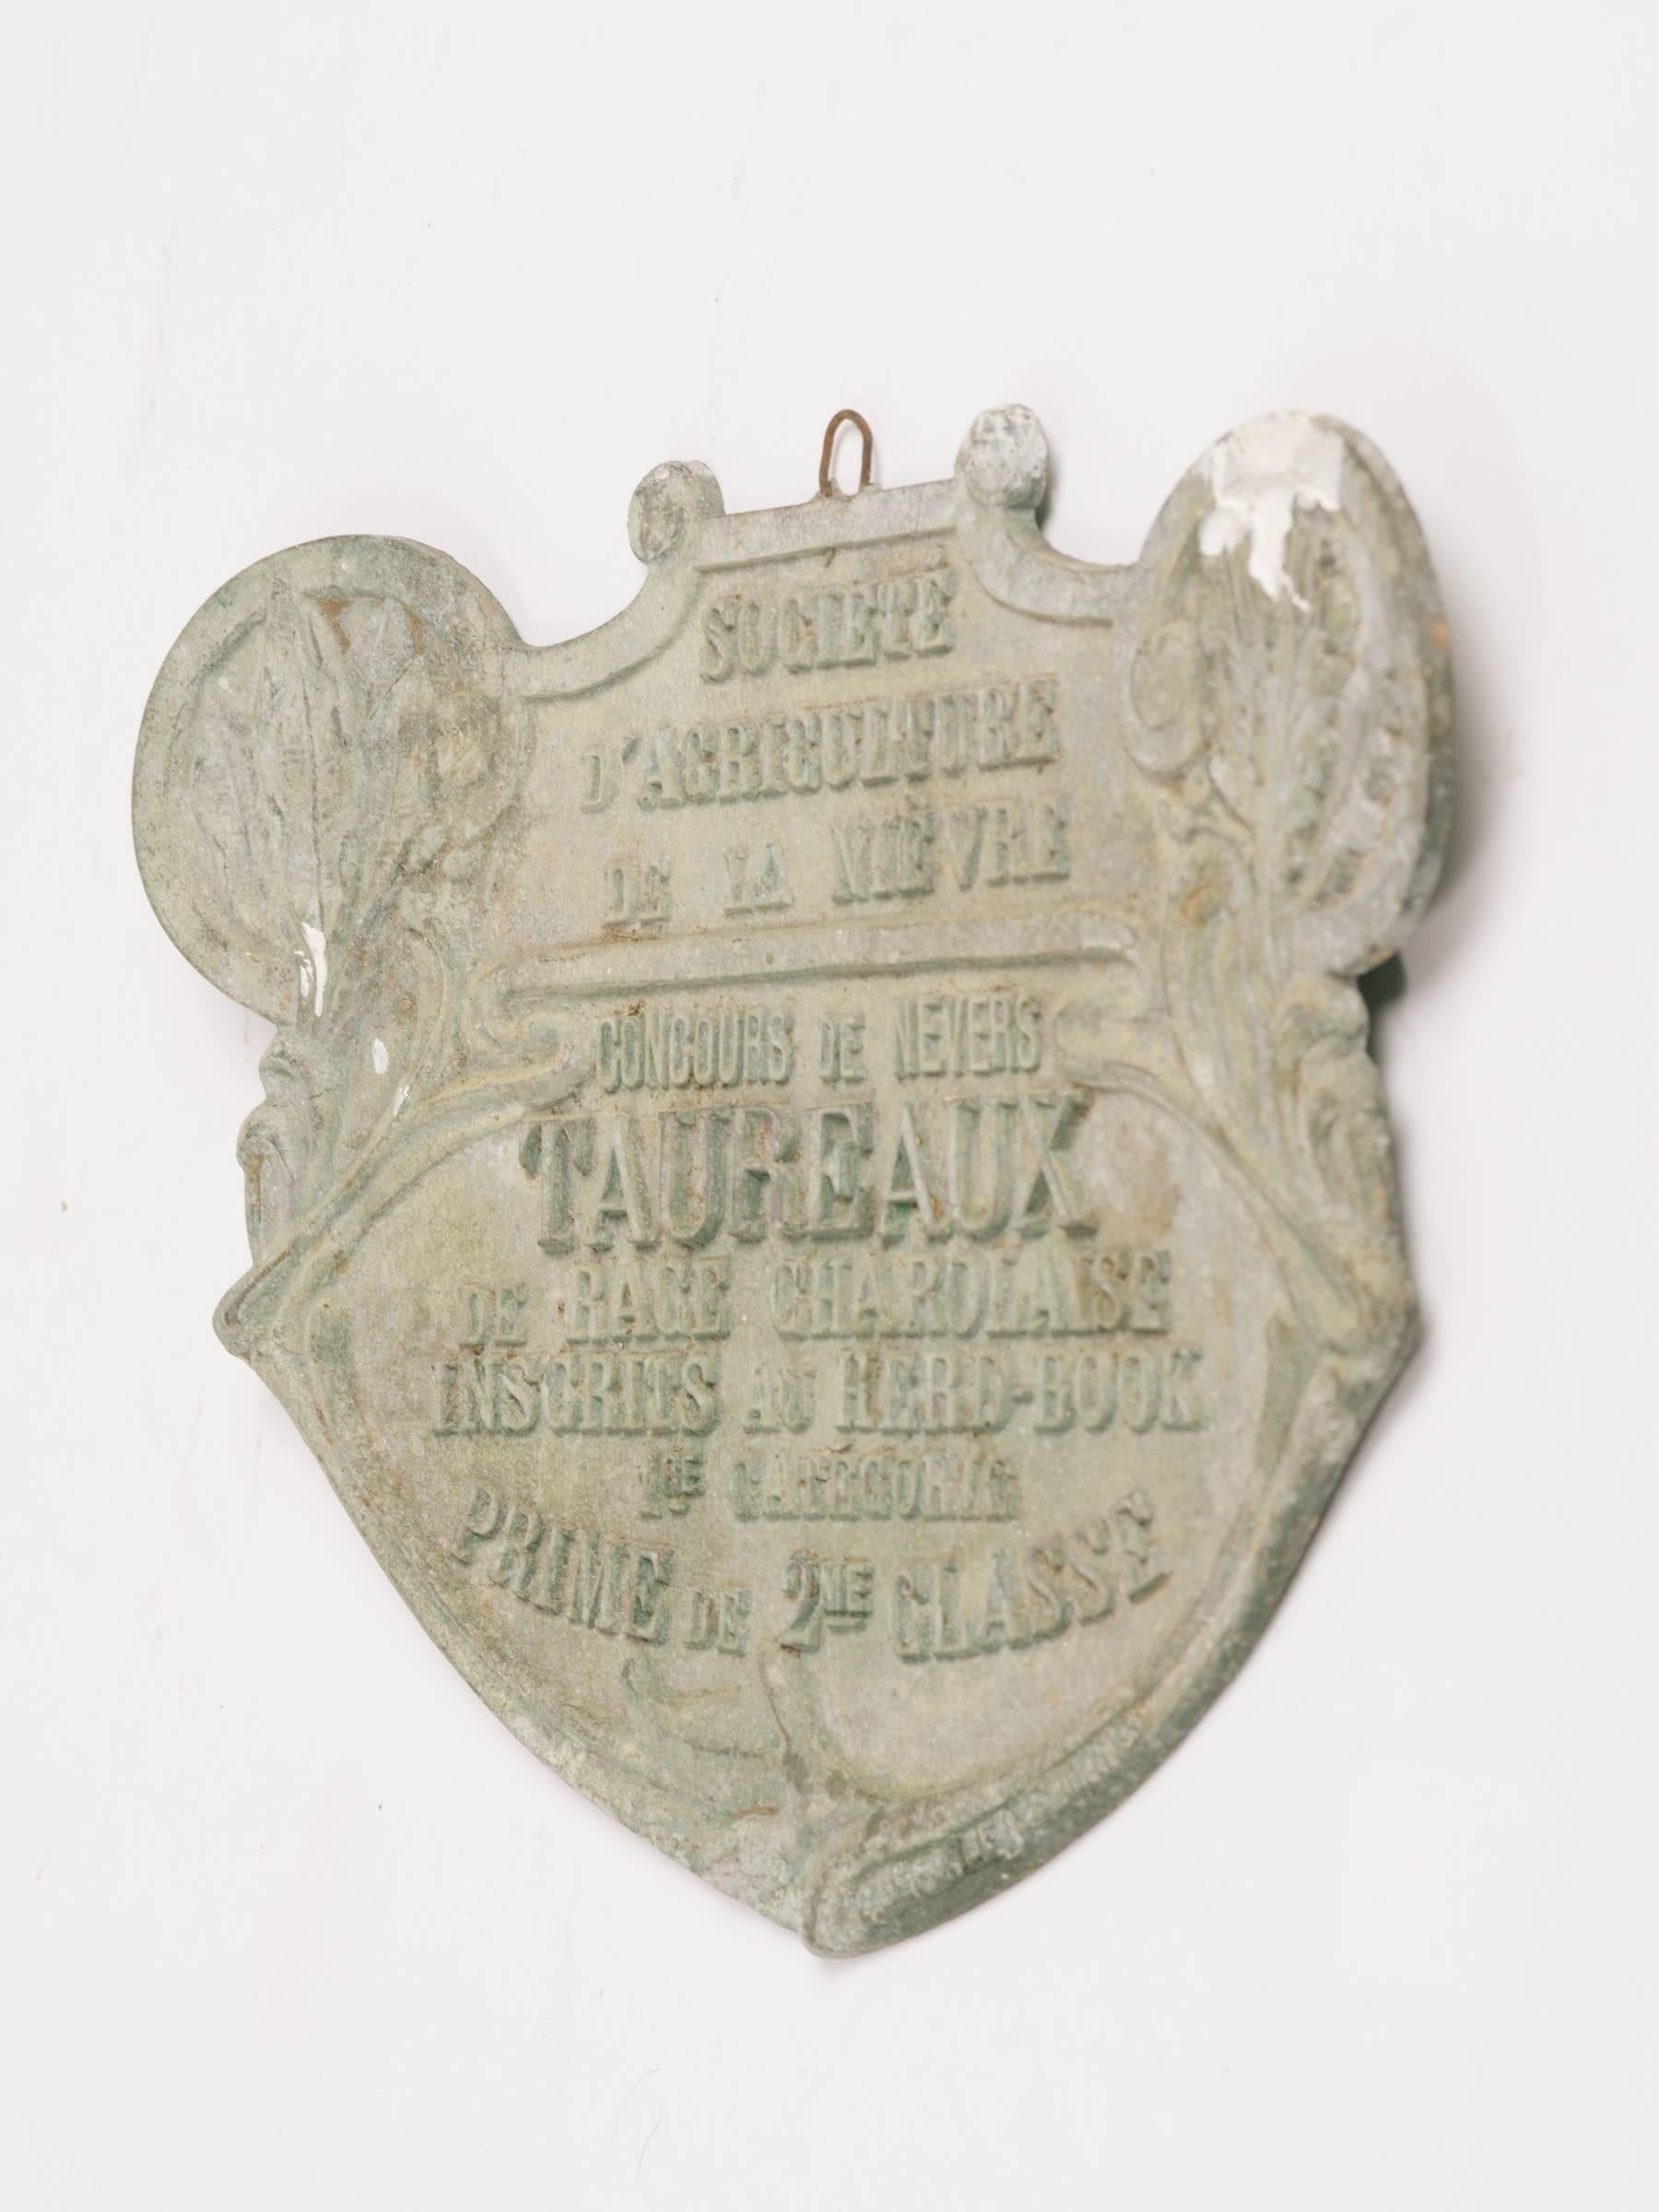 1940s French lead plaque stating that this bull won second place in an agricultural show.